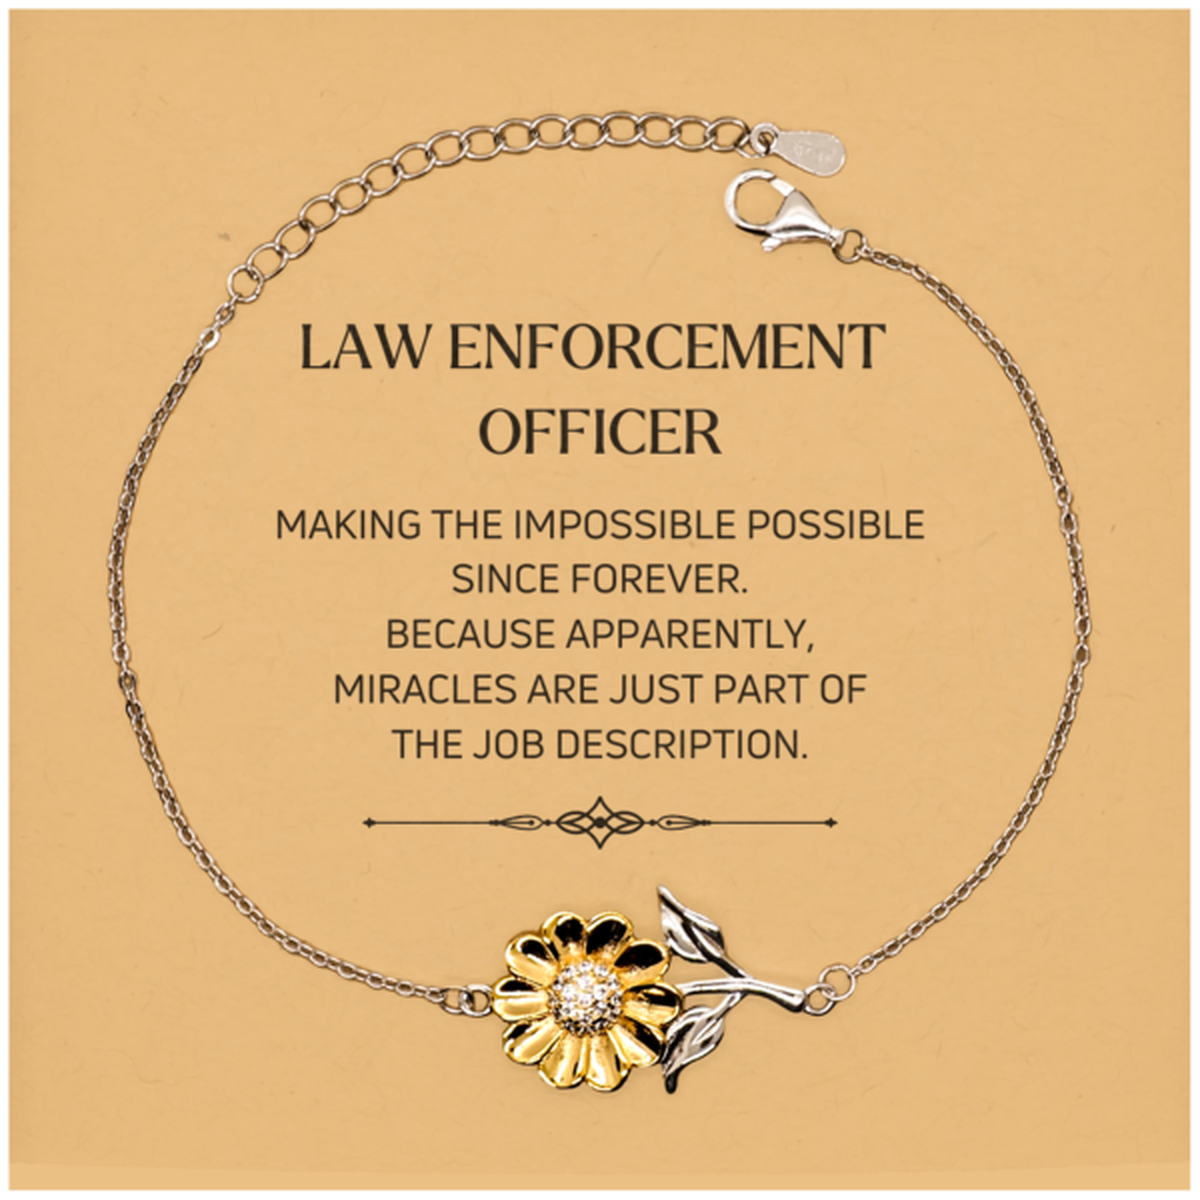 Funny Law Enforcement Officer Gifts, Miracles are just part of the job description, Inspirational Birthday Christmas Sunflower Bracelet For Law Enforcement Officer, Men, Women, Coworkers, Friends, Boss